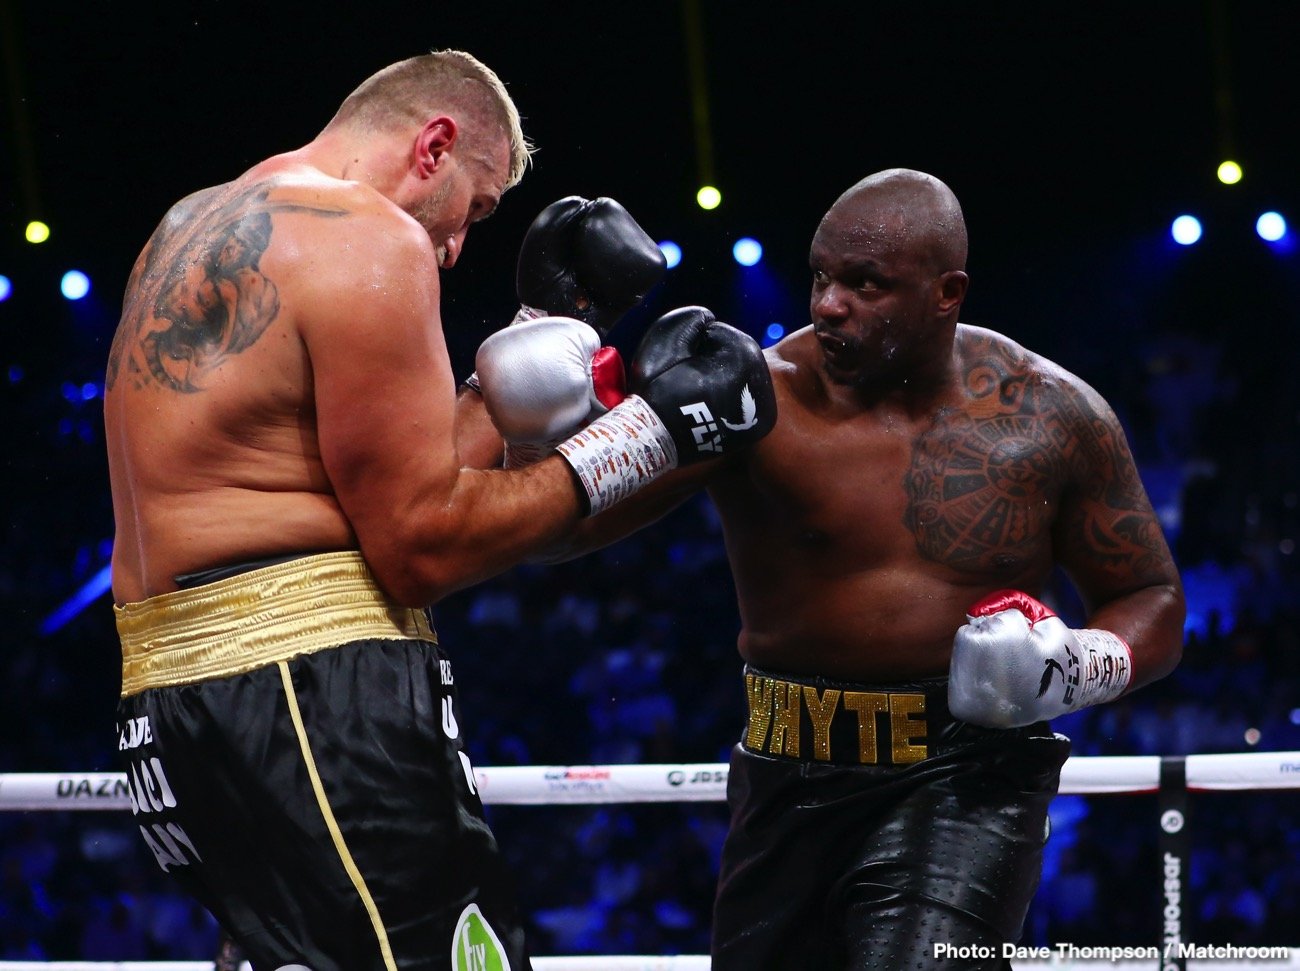 Image: Dillian Whyte has given up on Deontay Wilder, wants Joshua now